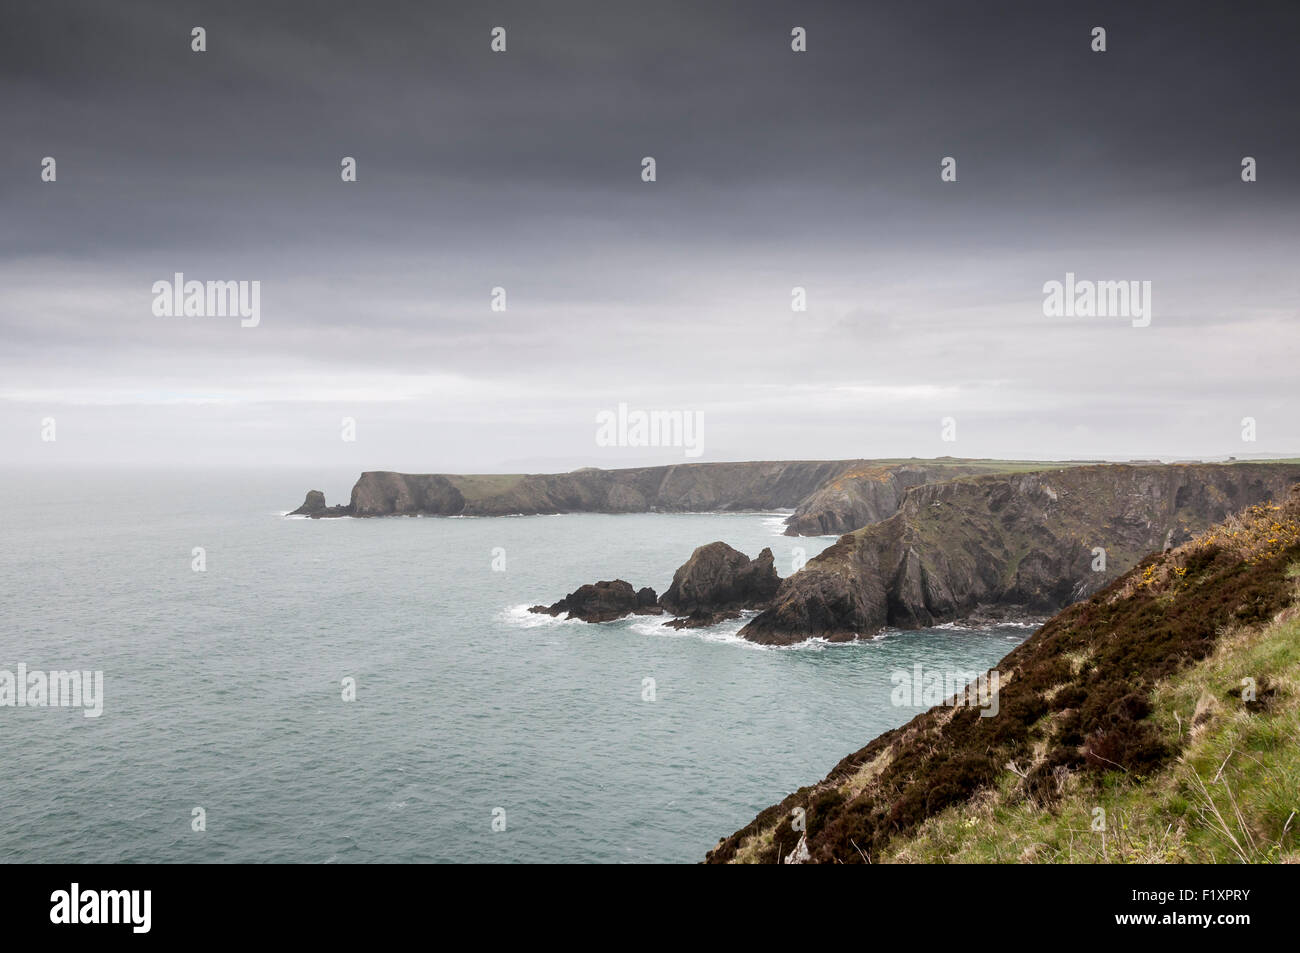 Rugged coastal landscape in North Pembrokeshire, Wales. Moody sky over cliffs and sea. Stock Photo